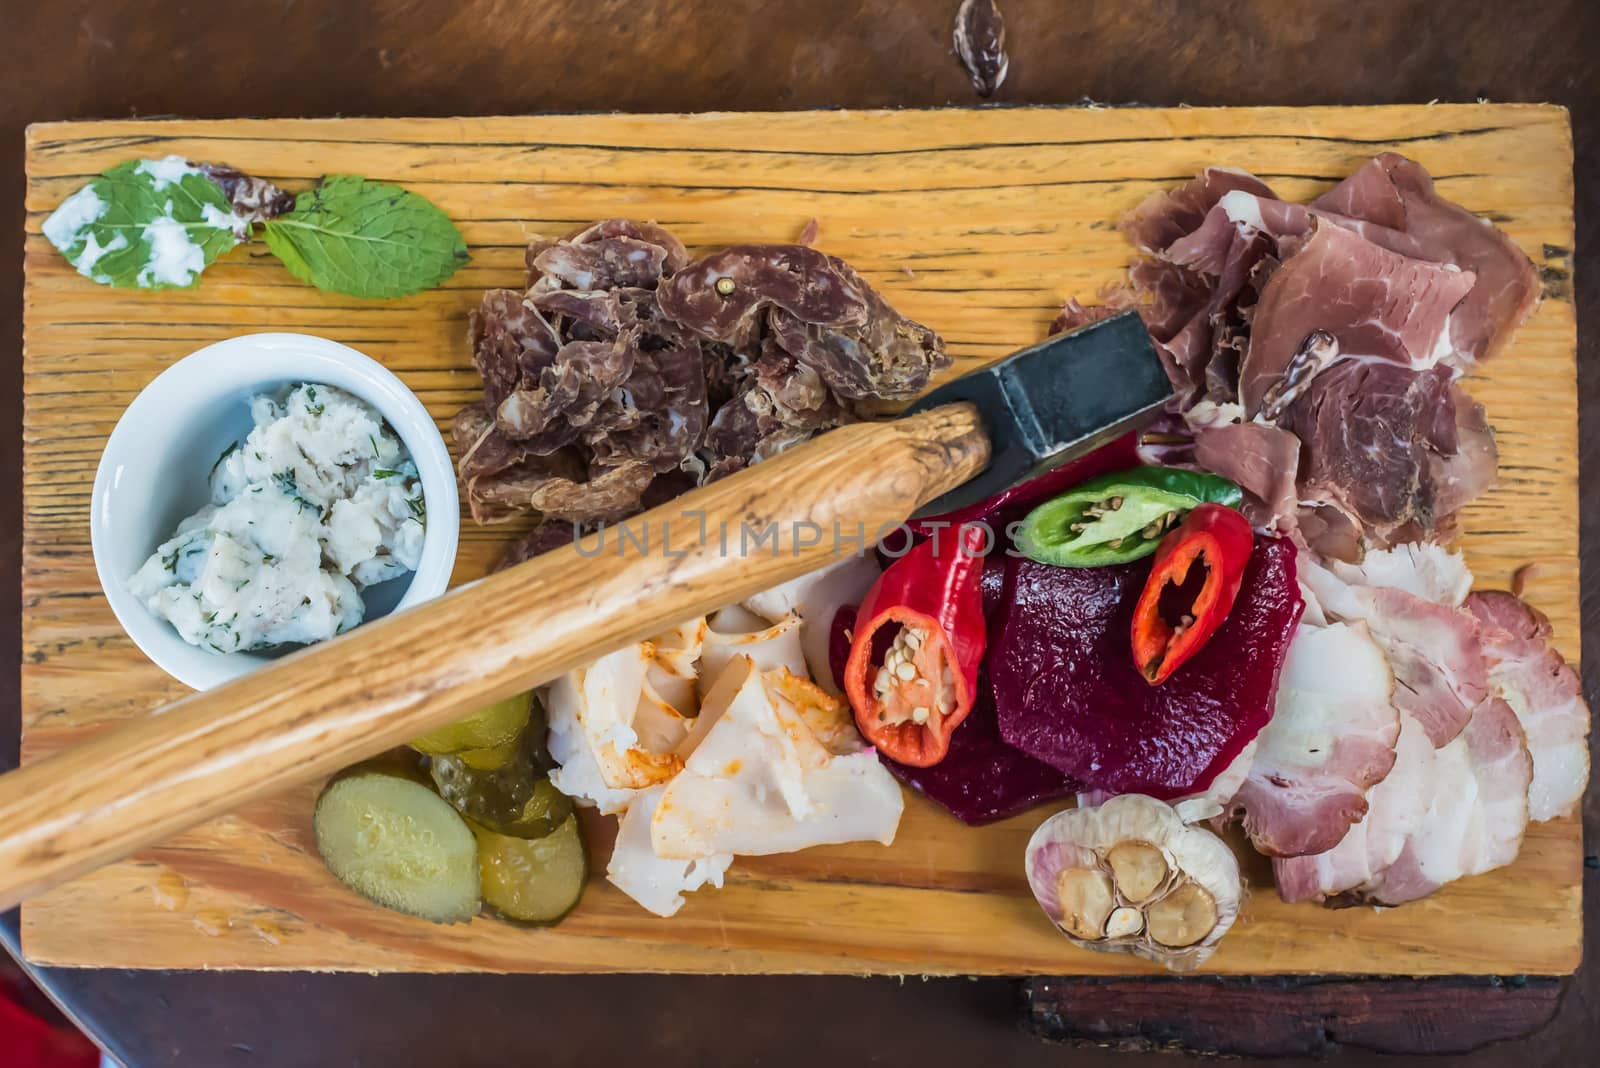 Slices fresh pork meat, lard on wooden board with vegetables, spices, stuck ax on the table